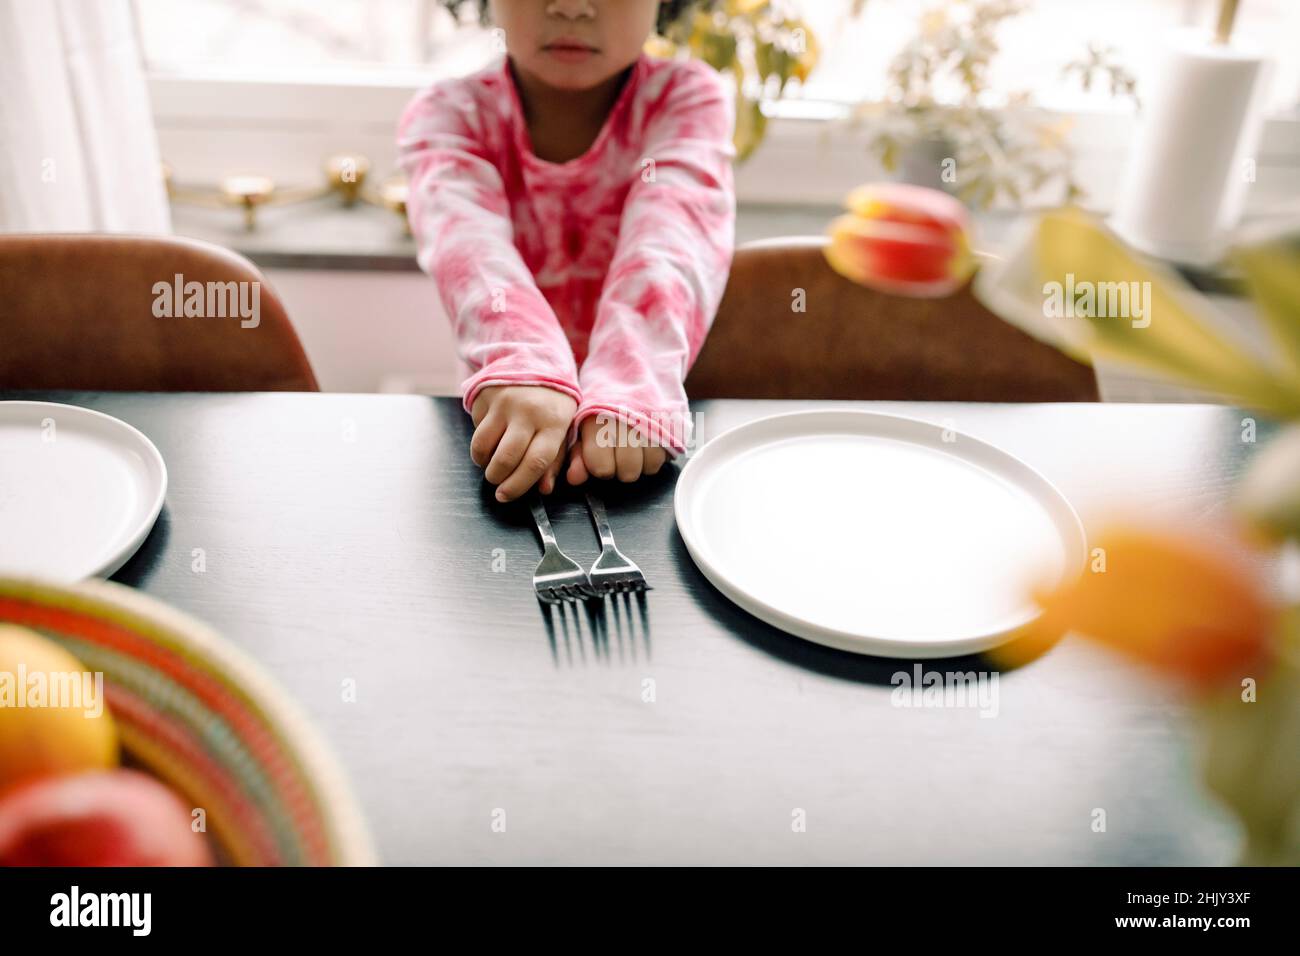 Midsection of girl with forks and plate on table at home Stock Photo